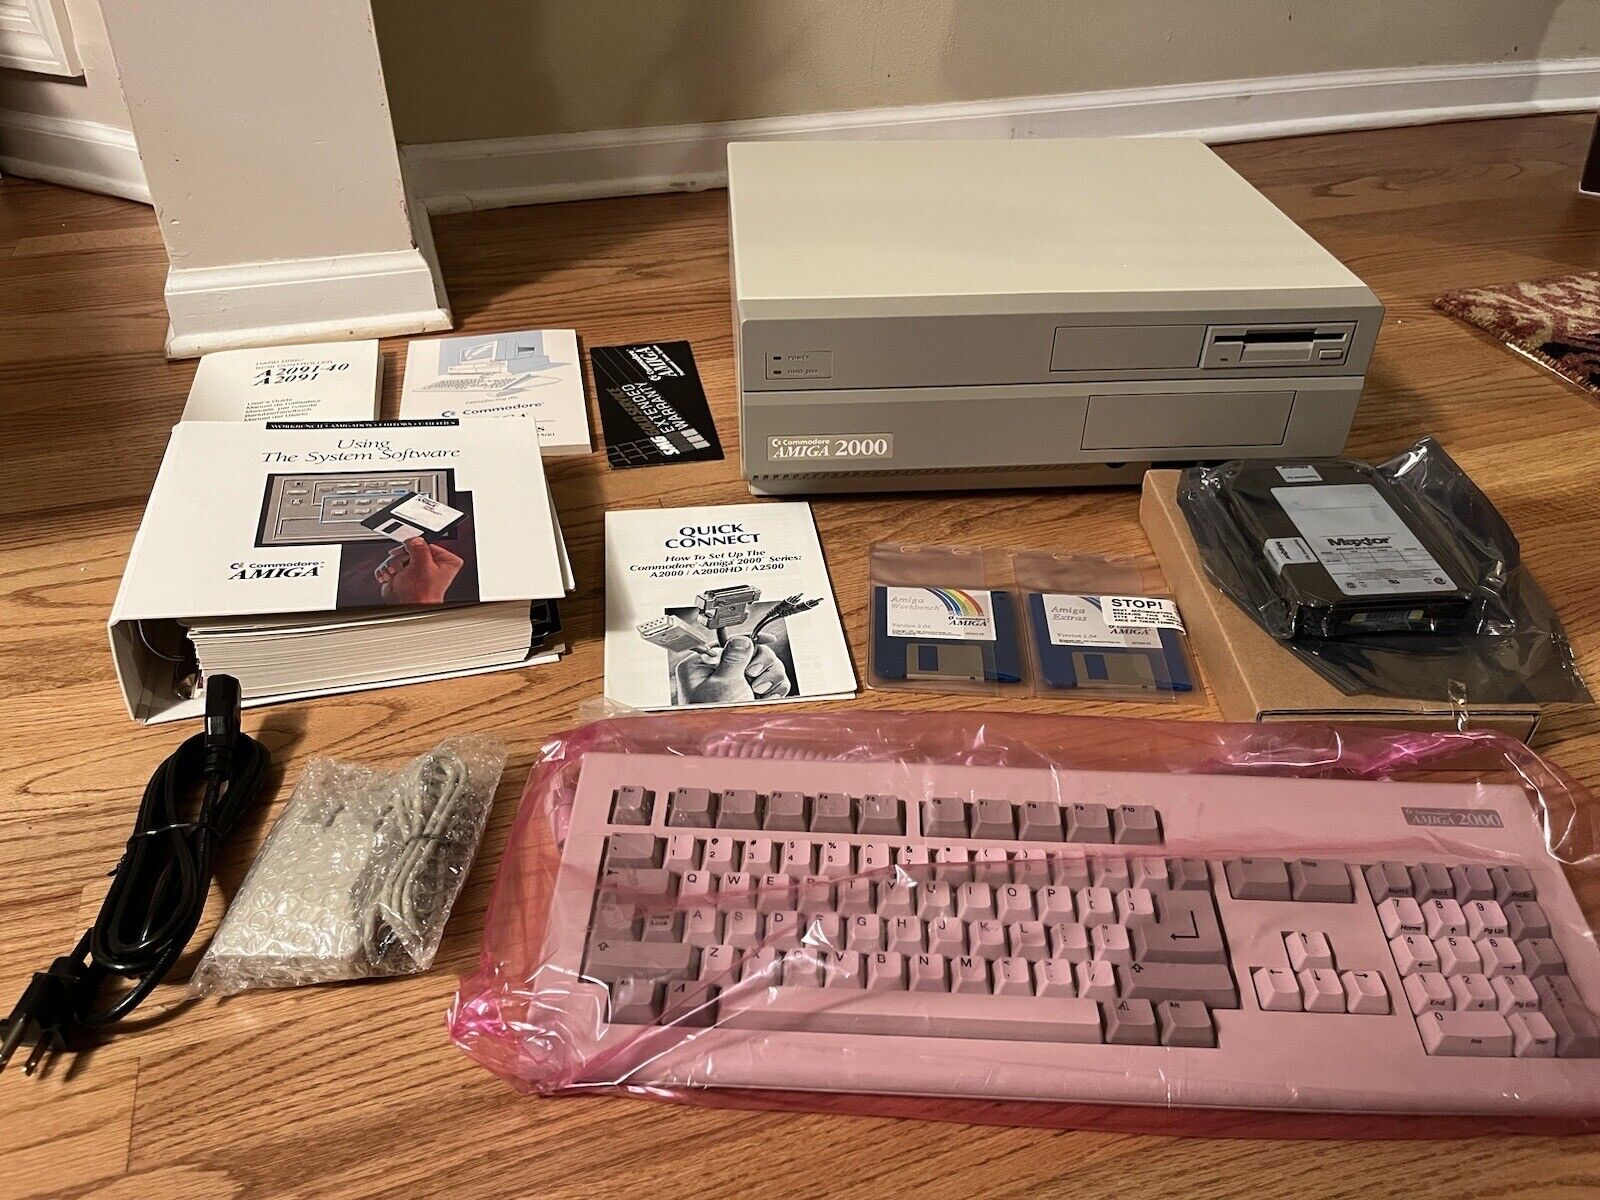 Vintage Commodore AMIGA A2000 Computer System - NEW OPEN BOX -Original Packaging